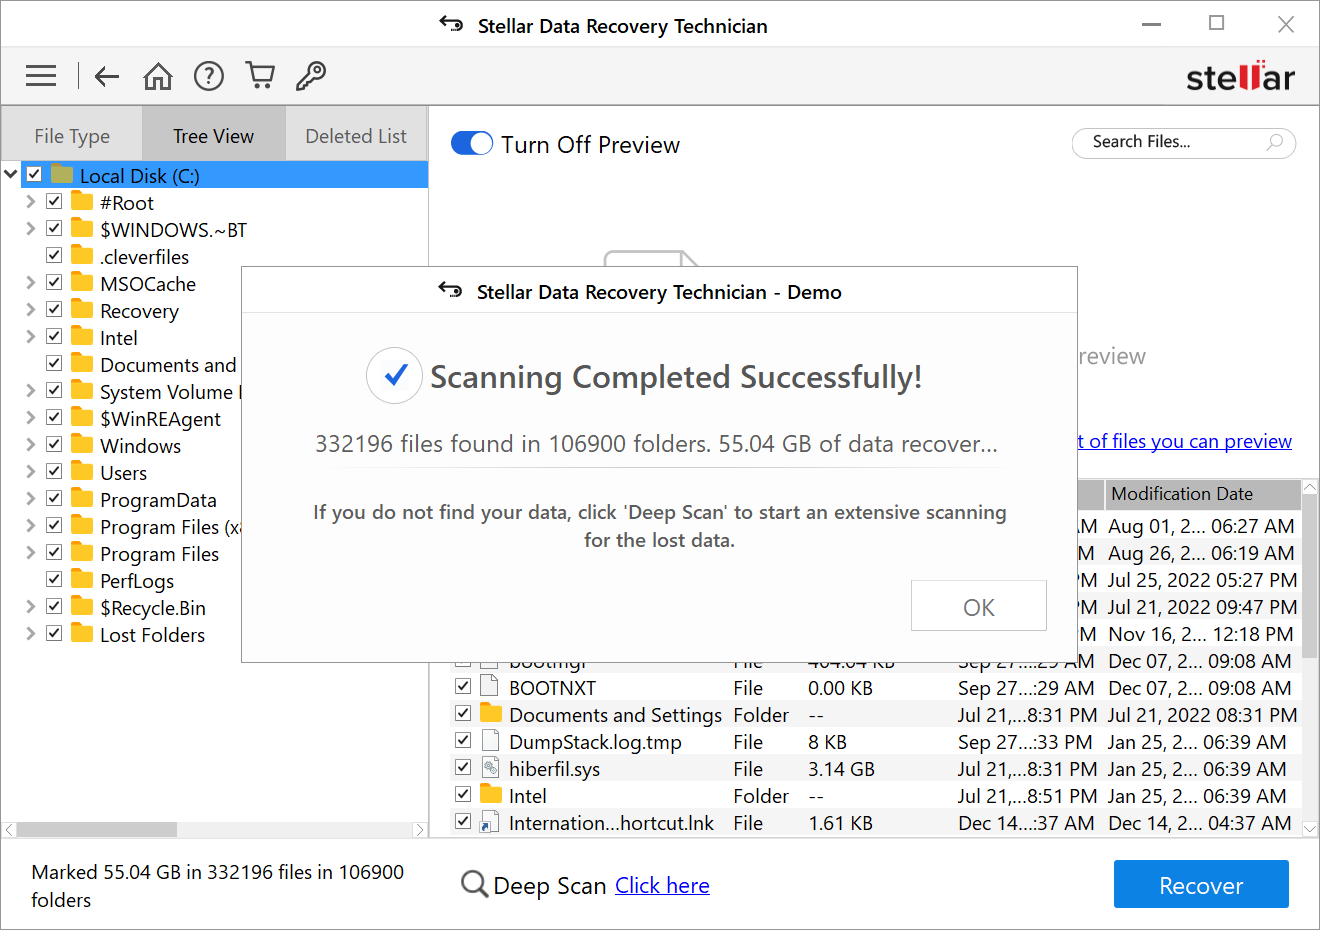 Screenshot of stellar data recovery technician software scanning for RAID recoverable files on a computer, displaying the scanning progress and a list of potentially recoverable documents.